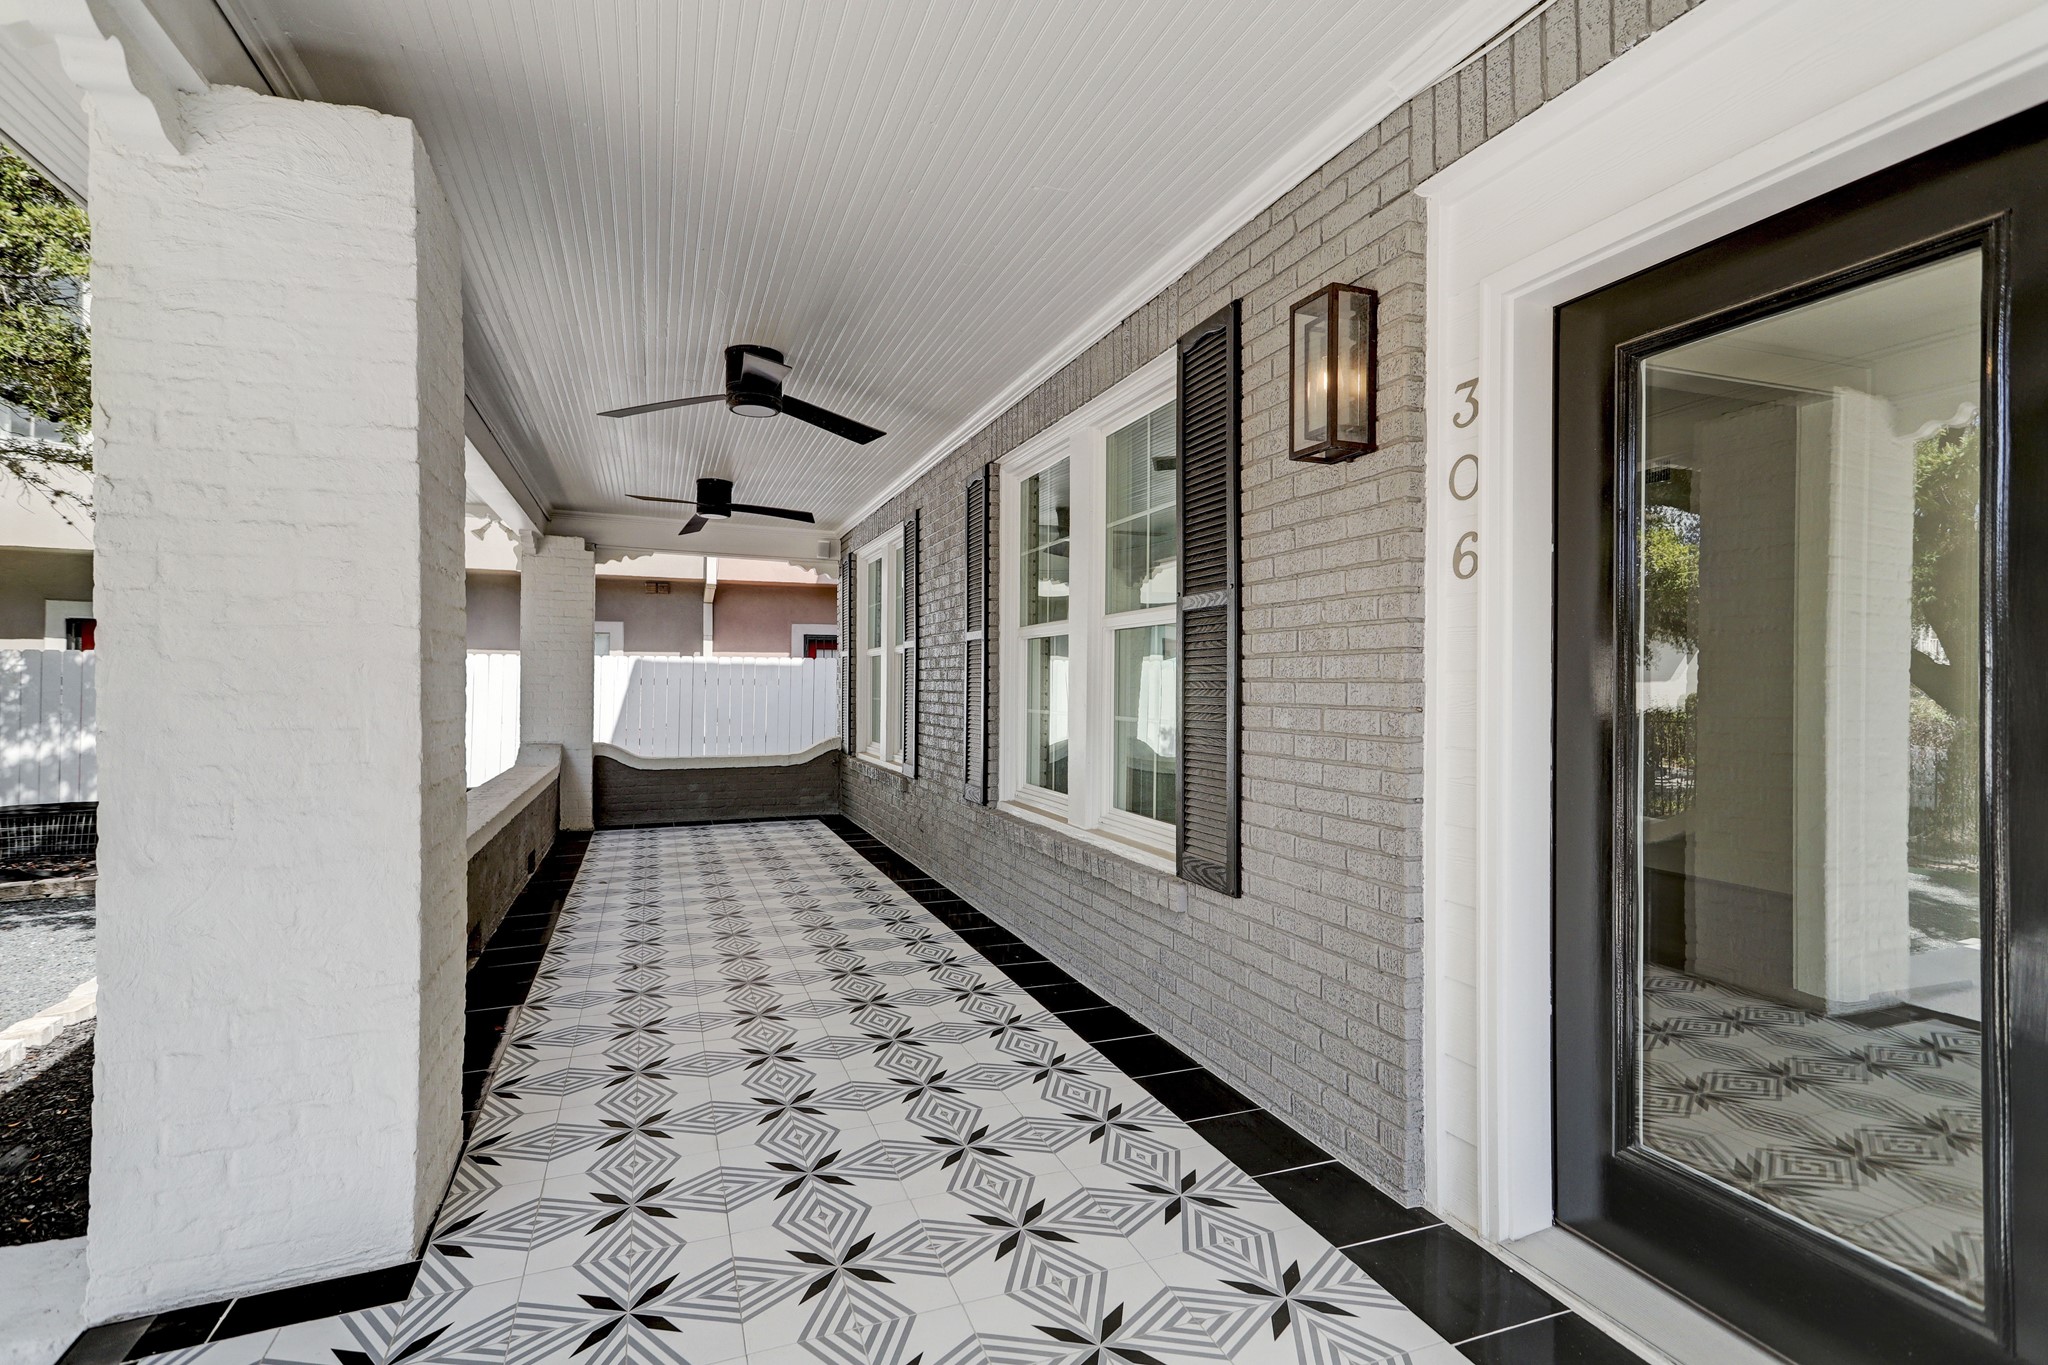 THIS CUSTOME TILE WORK WILL GREET YOU AND YOUR GUESTS ON APPROACH TO THE FRONT DOOR! THE FRONT PORCH IS ACCENTED WITH MODERN CONTEMPORARY FANS TO HELP WITH THOSE WARM SUMMER MONTHS.